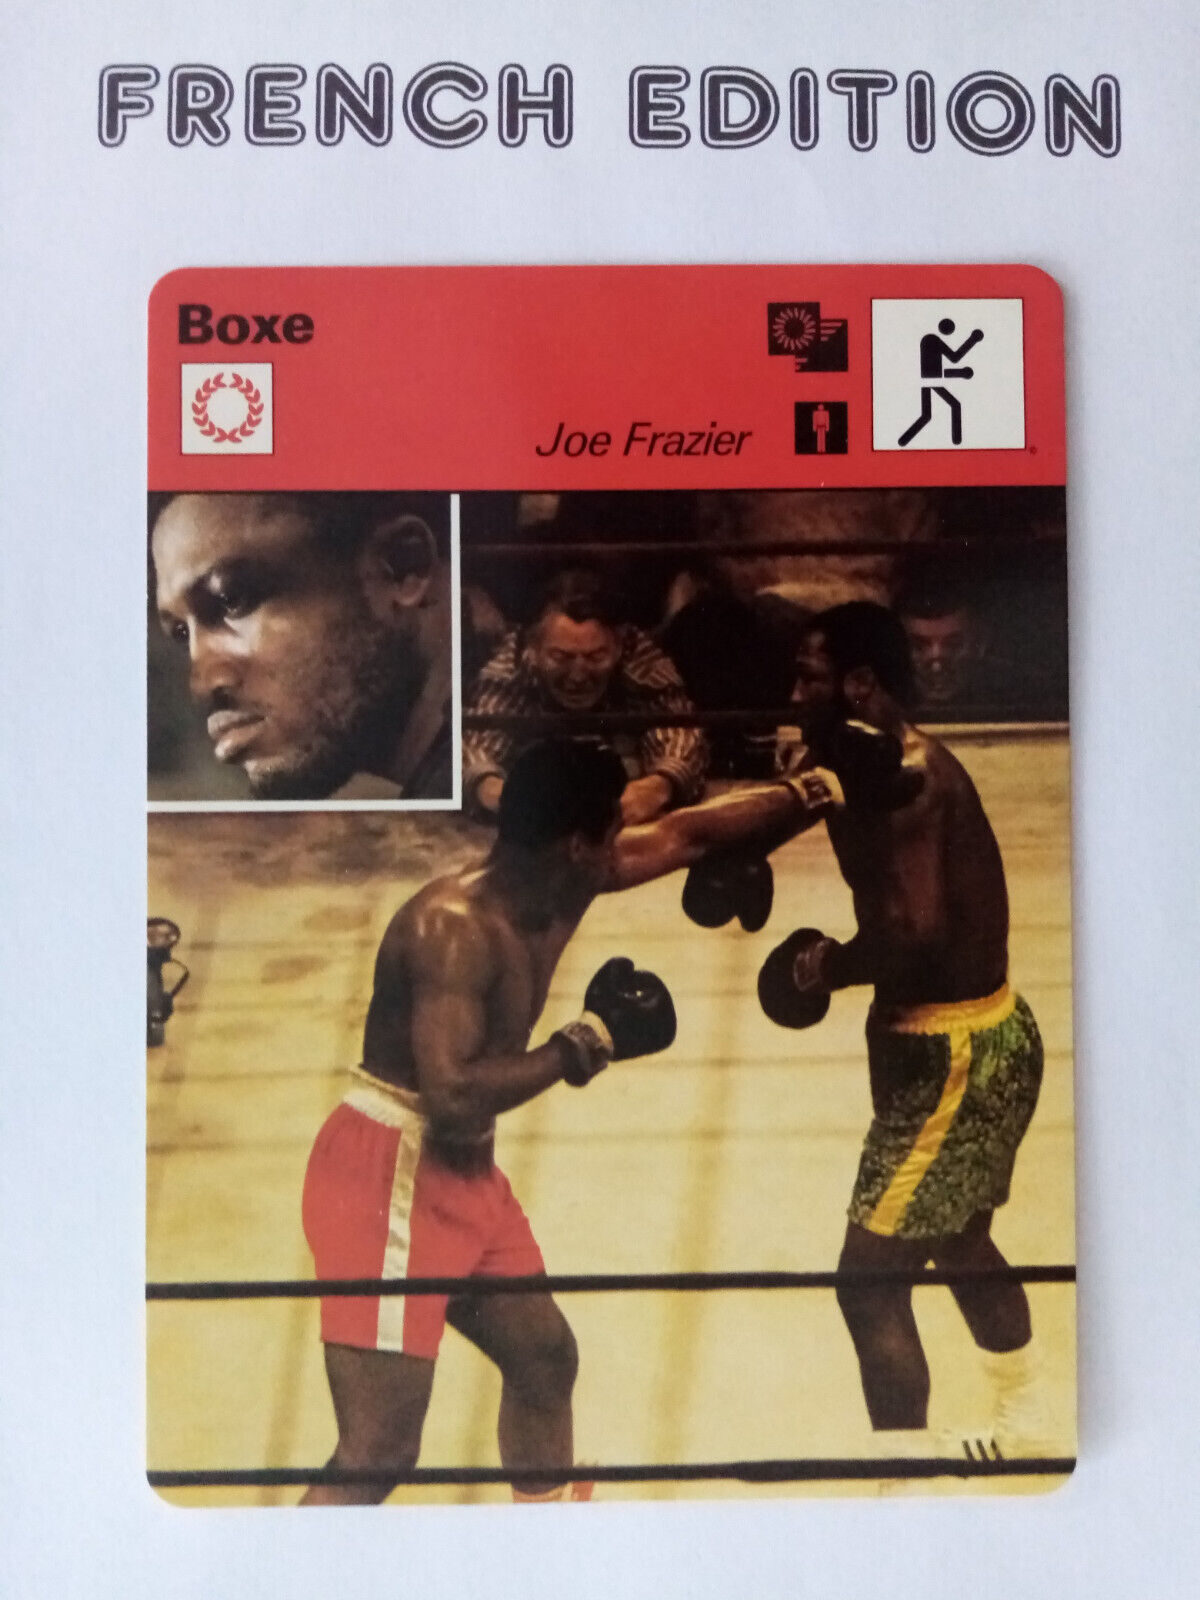 #32-14 Boxing Muhammad Ali Frazier Card French Sportscaster Editions Dating